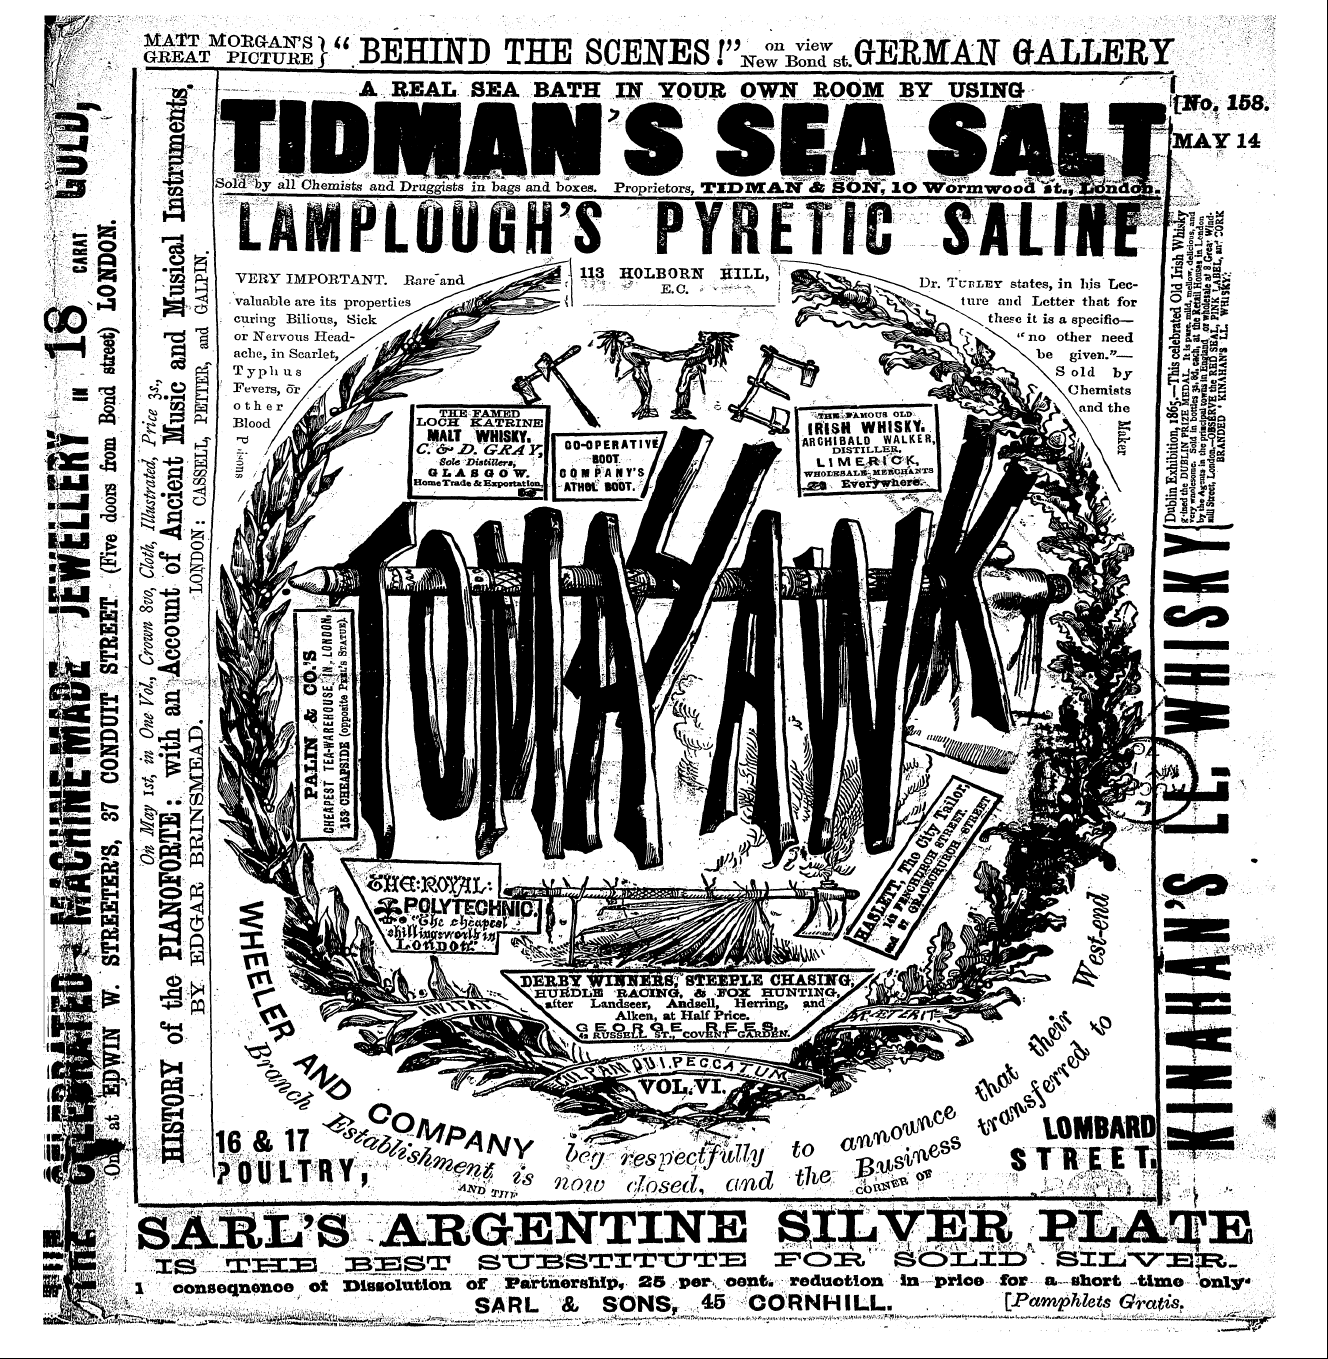 Tomahawk (1867-1870): jS F Y, 1st edition - ^ Tldrrf Tidmfam — ^^ ^ ^ ^ ^ ^ ^^^^ ^^ ^ ^ ^^ ^^ . L A Real An Sea Bath .Job 'S S . Your Sefl S Ow Own N Eji Boom Bby By Sasitiway Sji _Usinq Usinq Sitf Zzjuft «—» Solfrb Solmby Y All All Chemists Chemists And And Drugg Druggisfcs Ists " ^ Iii In Bags Bags And And Boxes Boxes. . Proprietors Proprietorg, , Tid Tipmai Iviai^^F F &Lt;«Fe Fe Wt S^Jnt &Gt;N^ Y Lq 1&Lt;&Gt; ' ' Wormwood Lkrormvr6o2ljft '1ii ^ ^ ^ ^^ N! S ^ ^ |$ ^ J